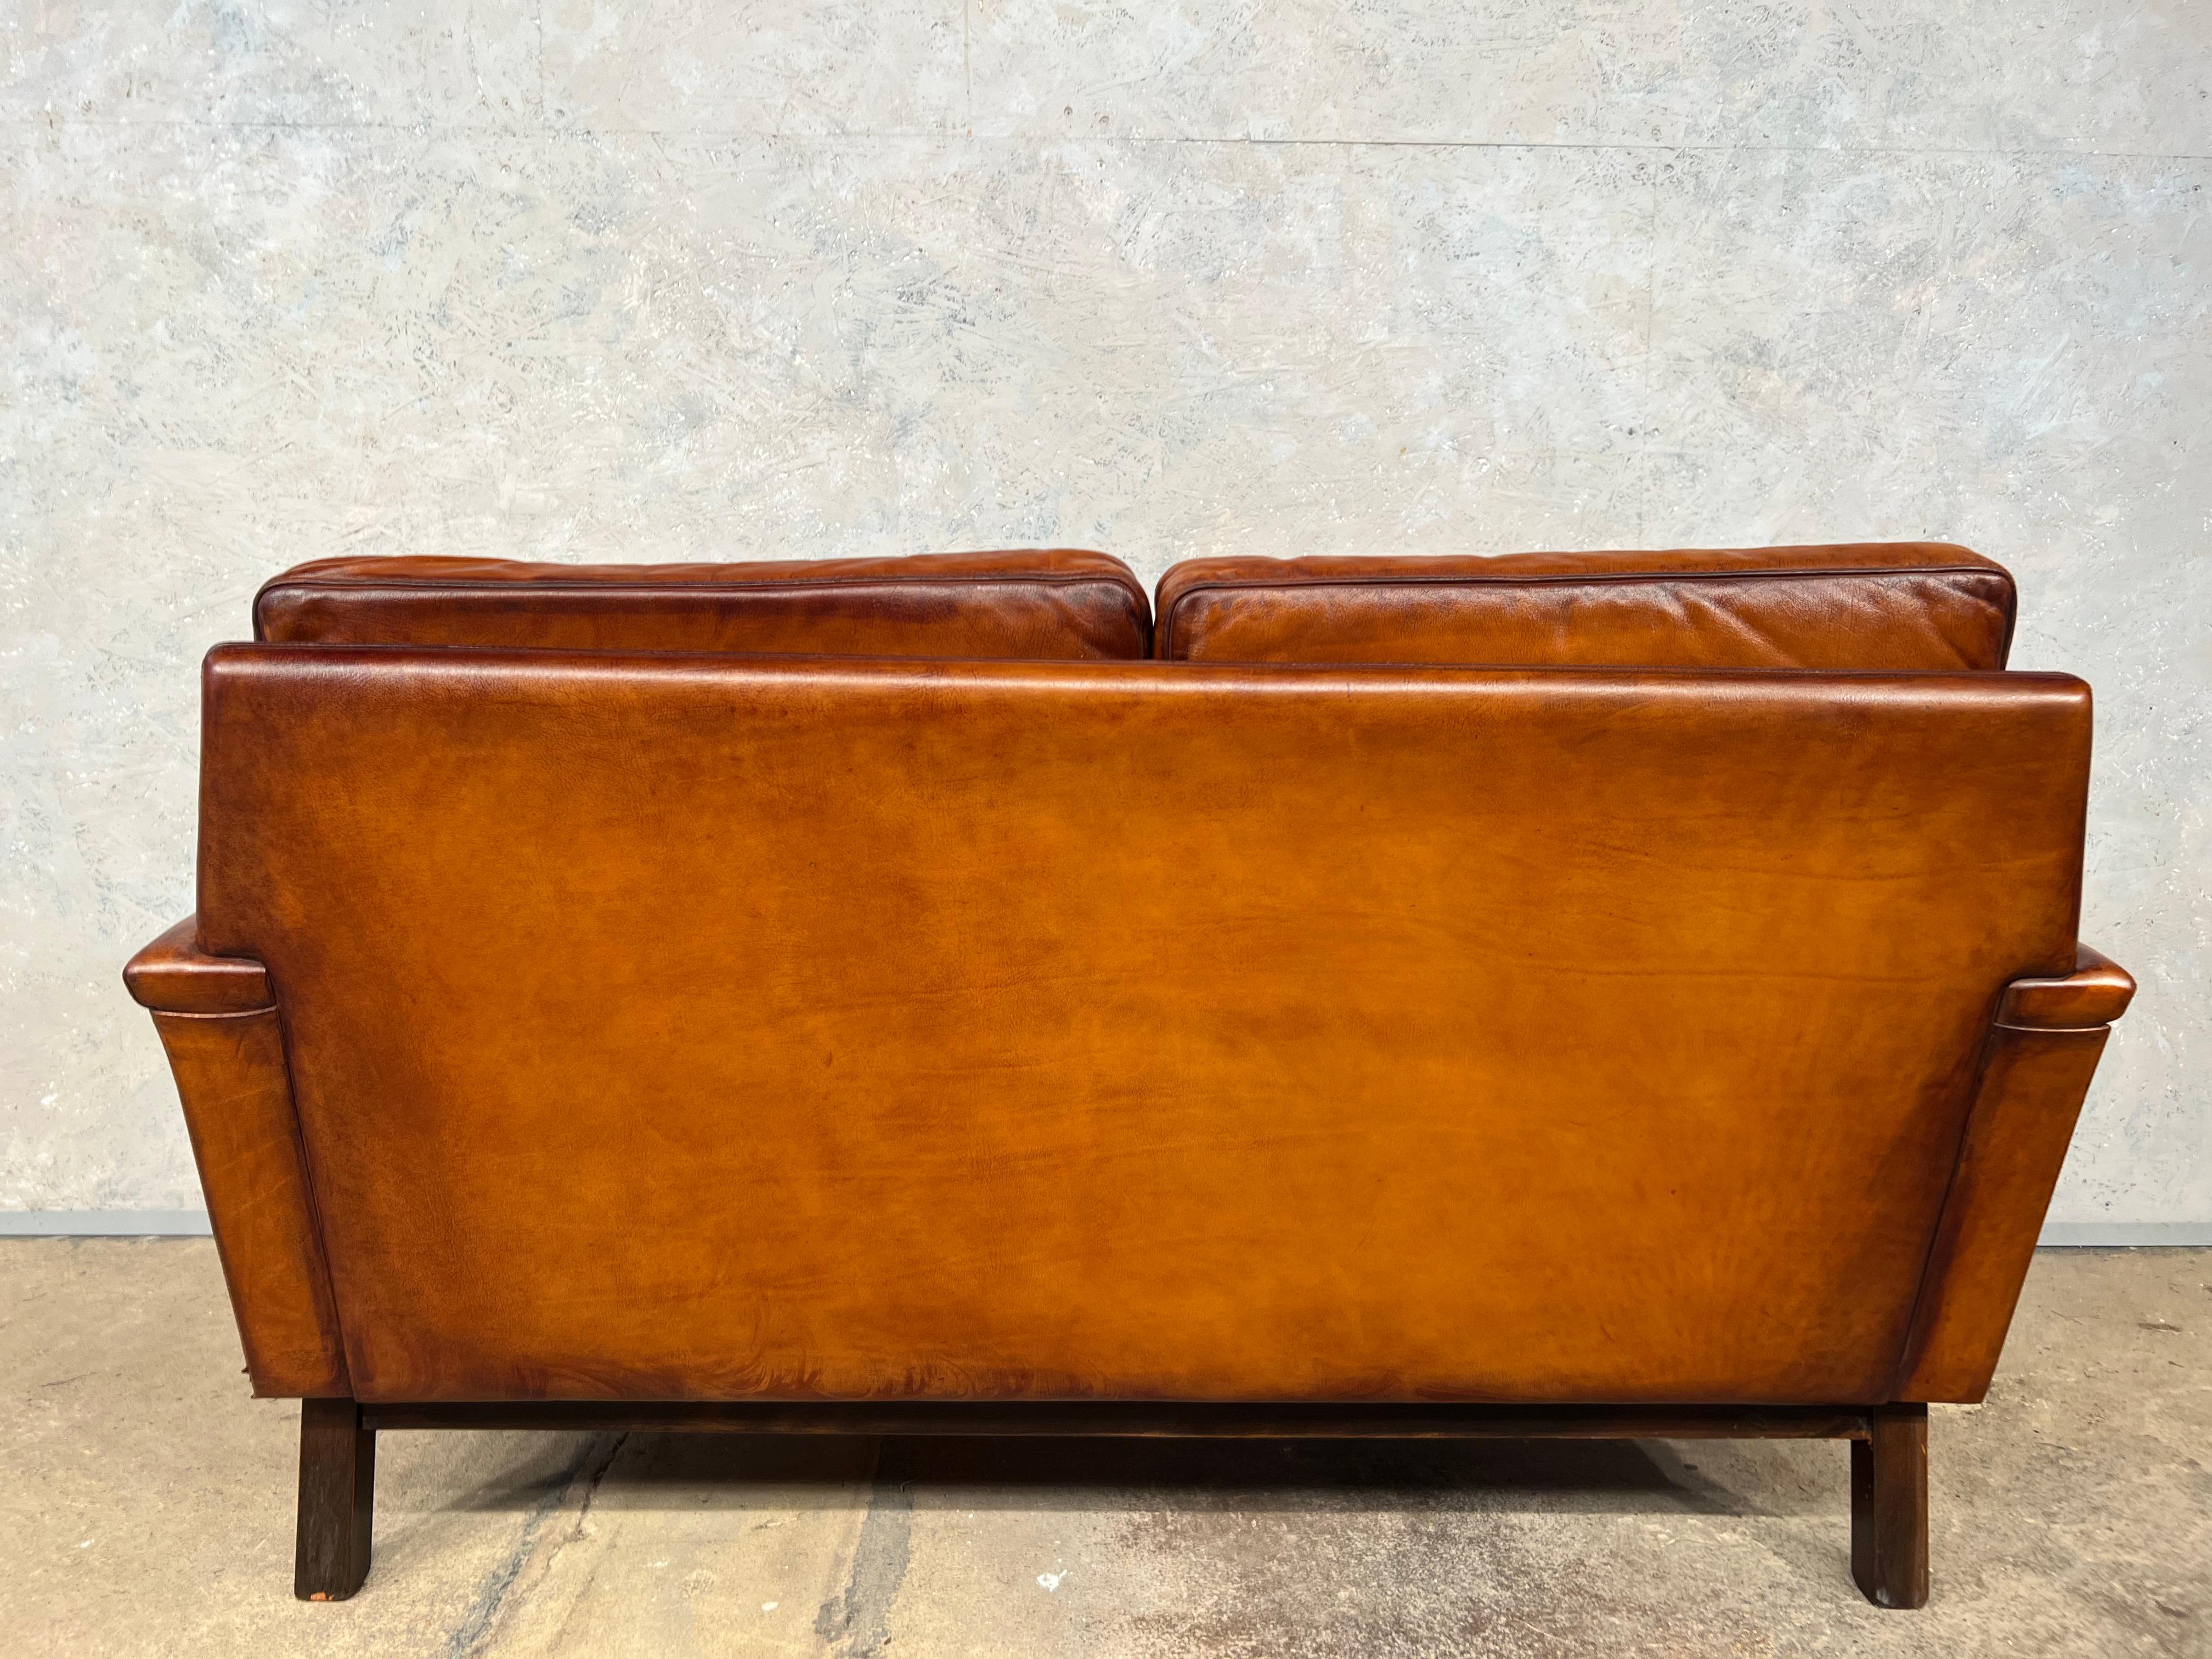 Vintage Danish 70s Mid-Century Light Tan Two Seater Leather Sofa #547 For Sale 3